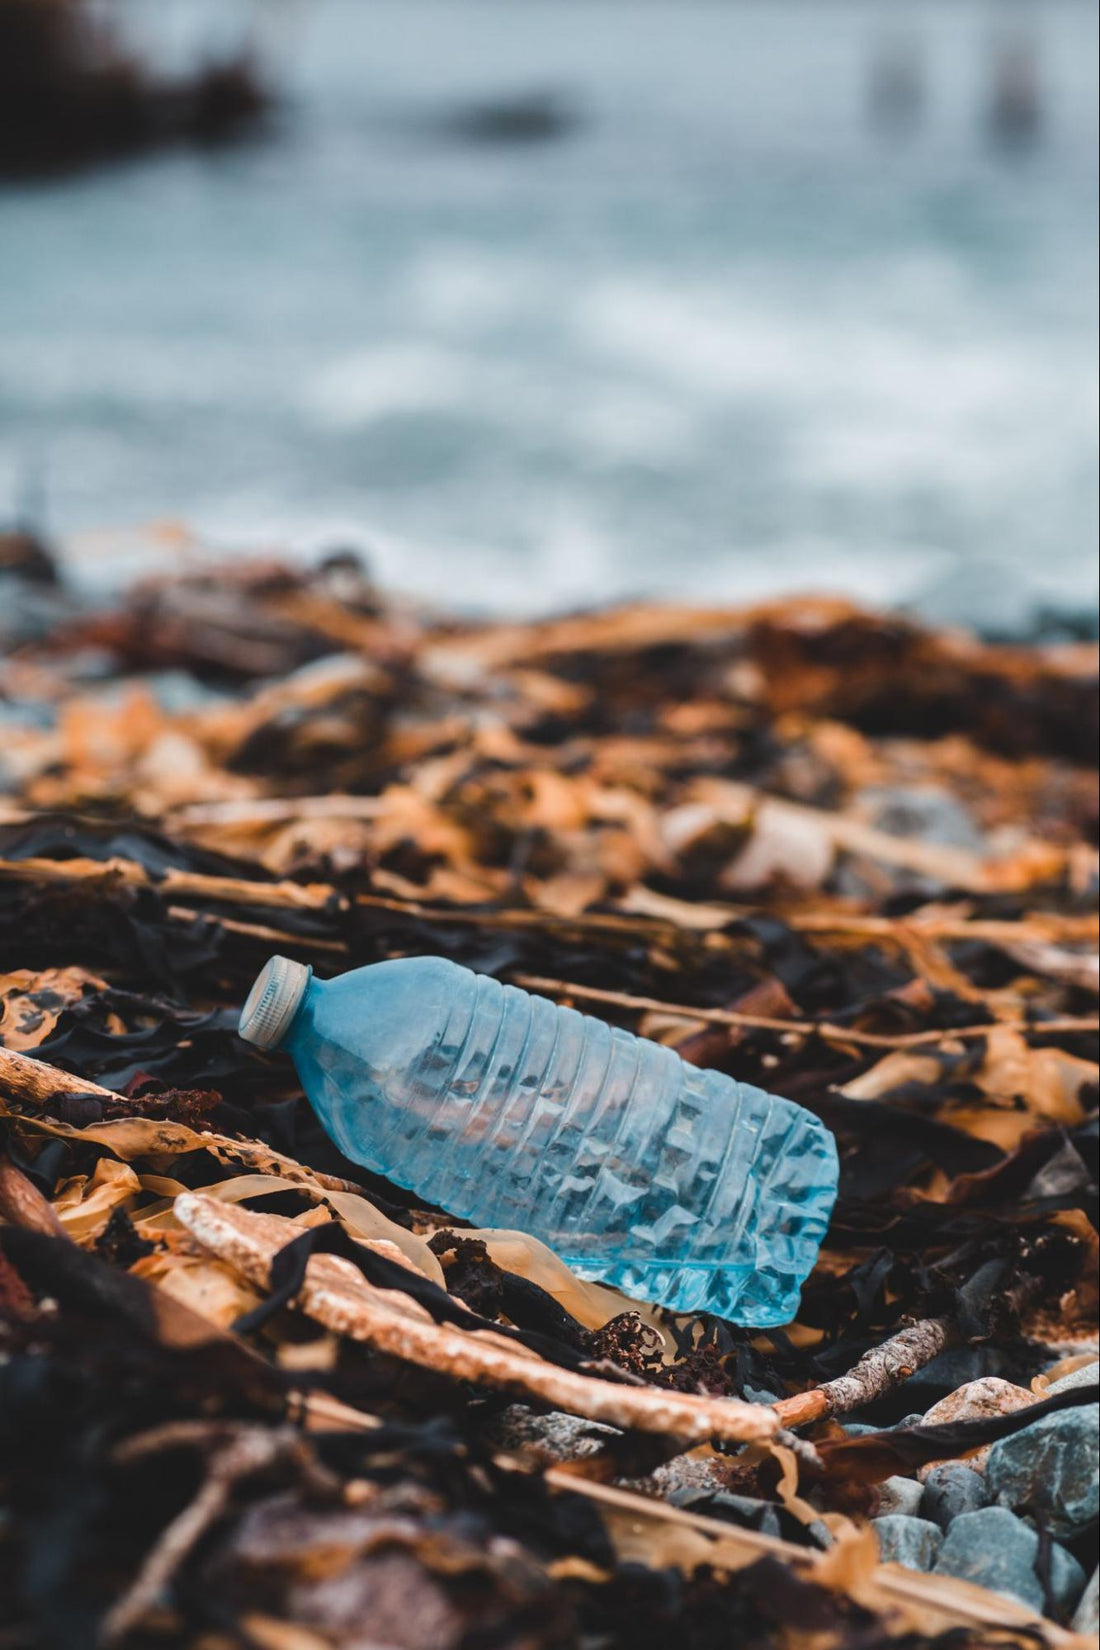  A used plastic water bottle that has been discarded in nature